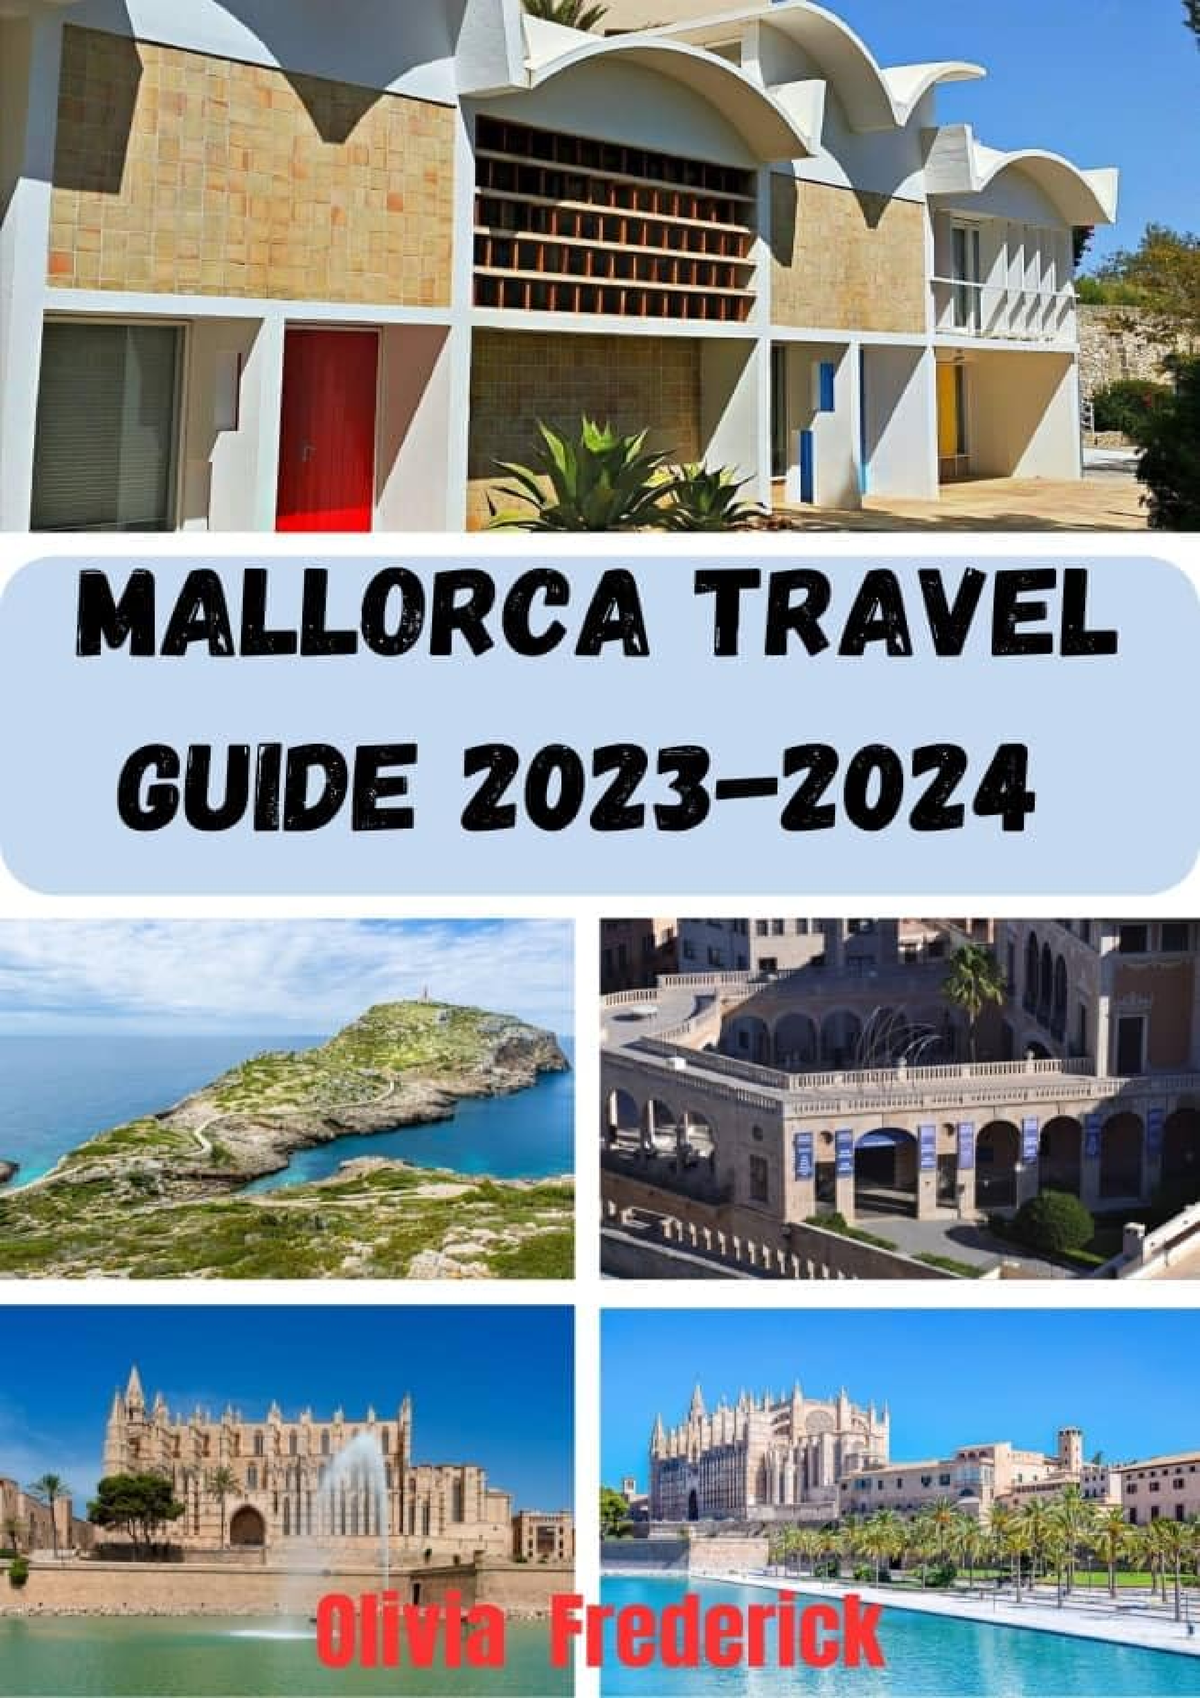 Mallorca Travel Guide 2023: A Simple Travel Book to Sun-soaked Beaches,  Rich Heritage, and Mediterranean Delights - Your Most Up-to Date Mallorca